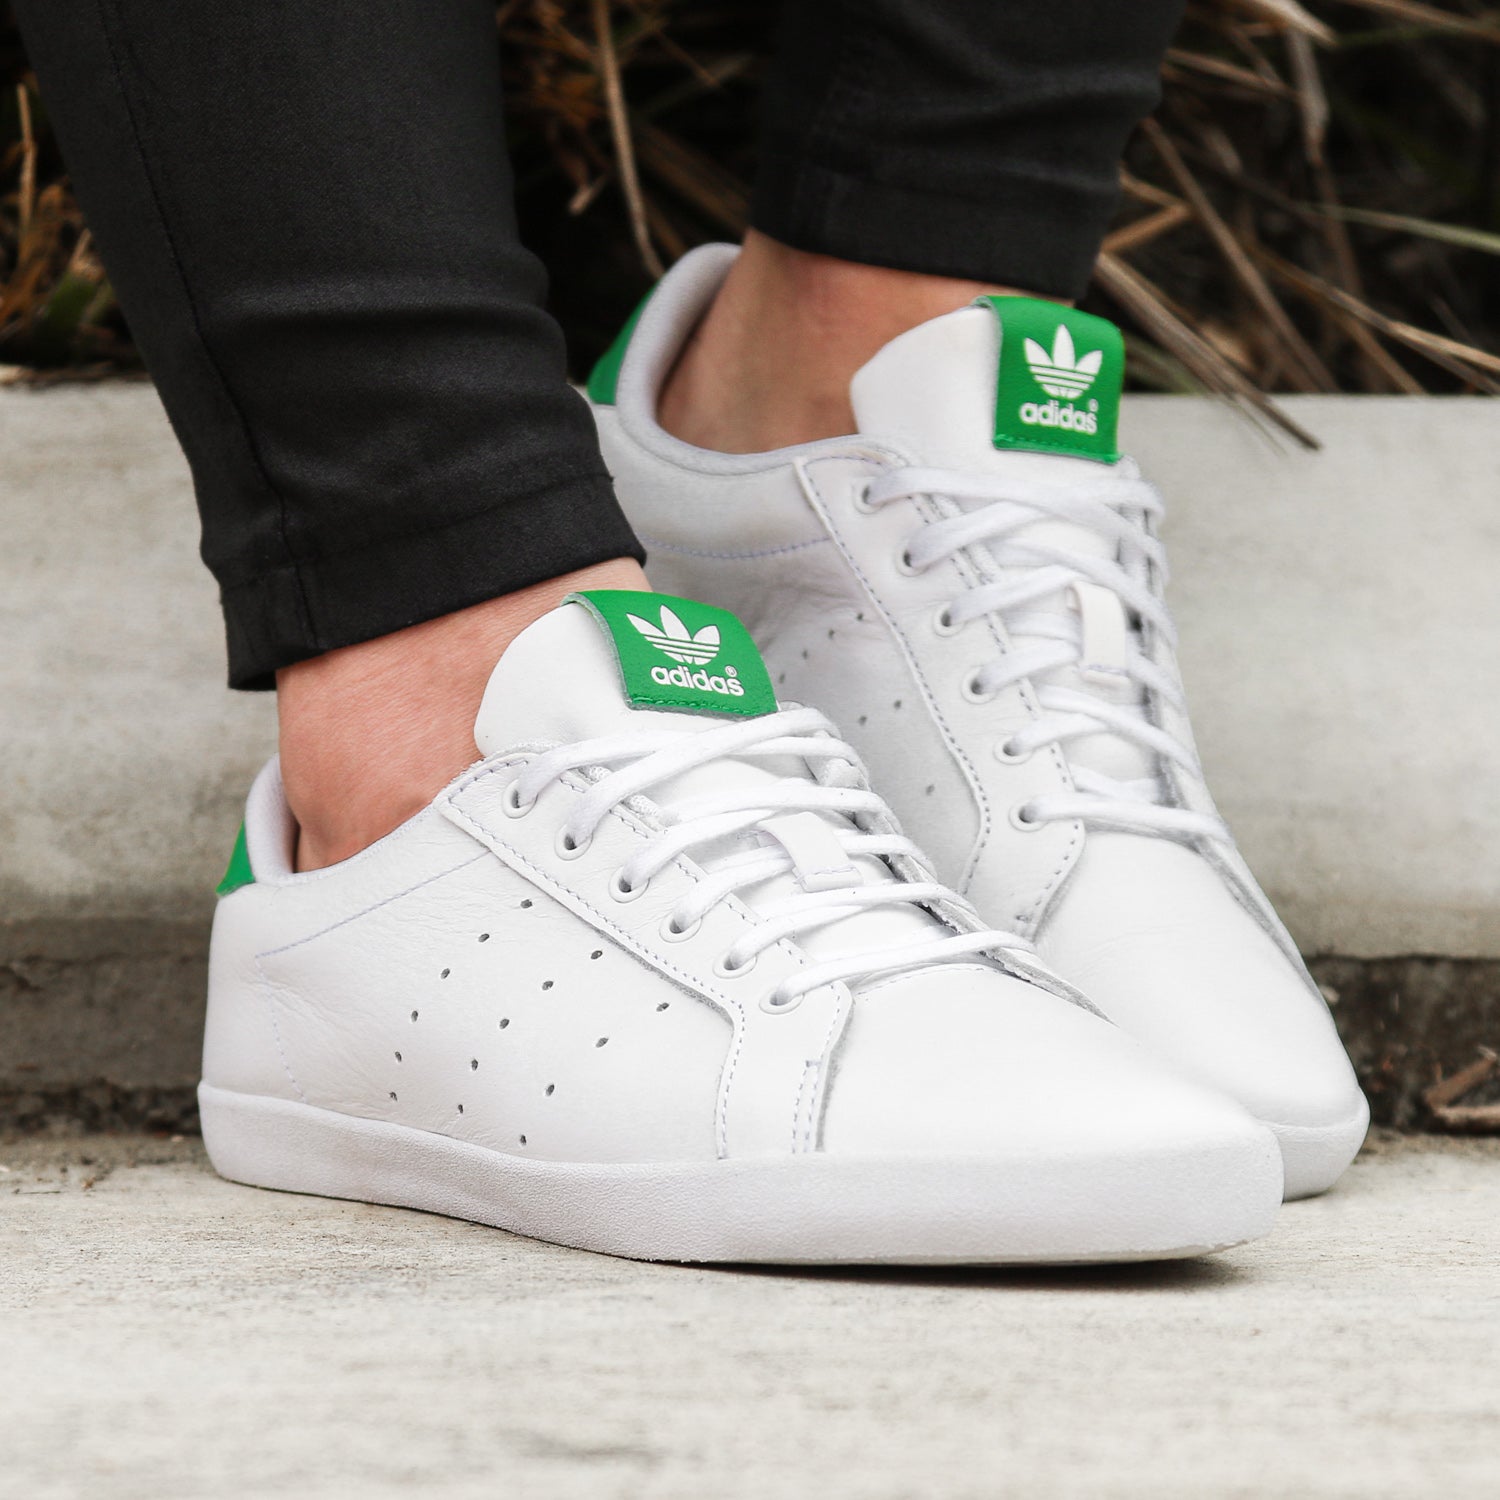 miss stan smith shoes